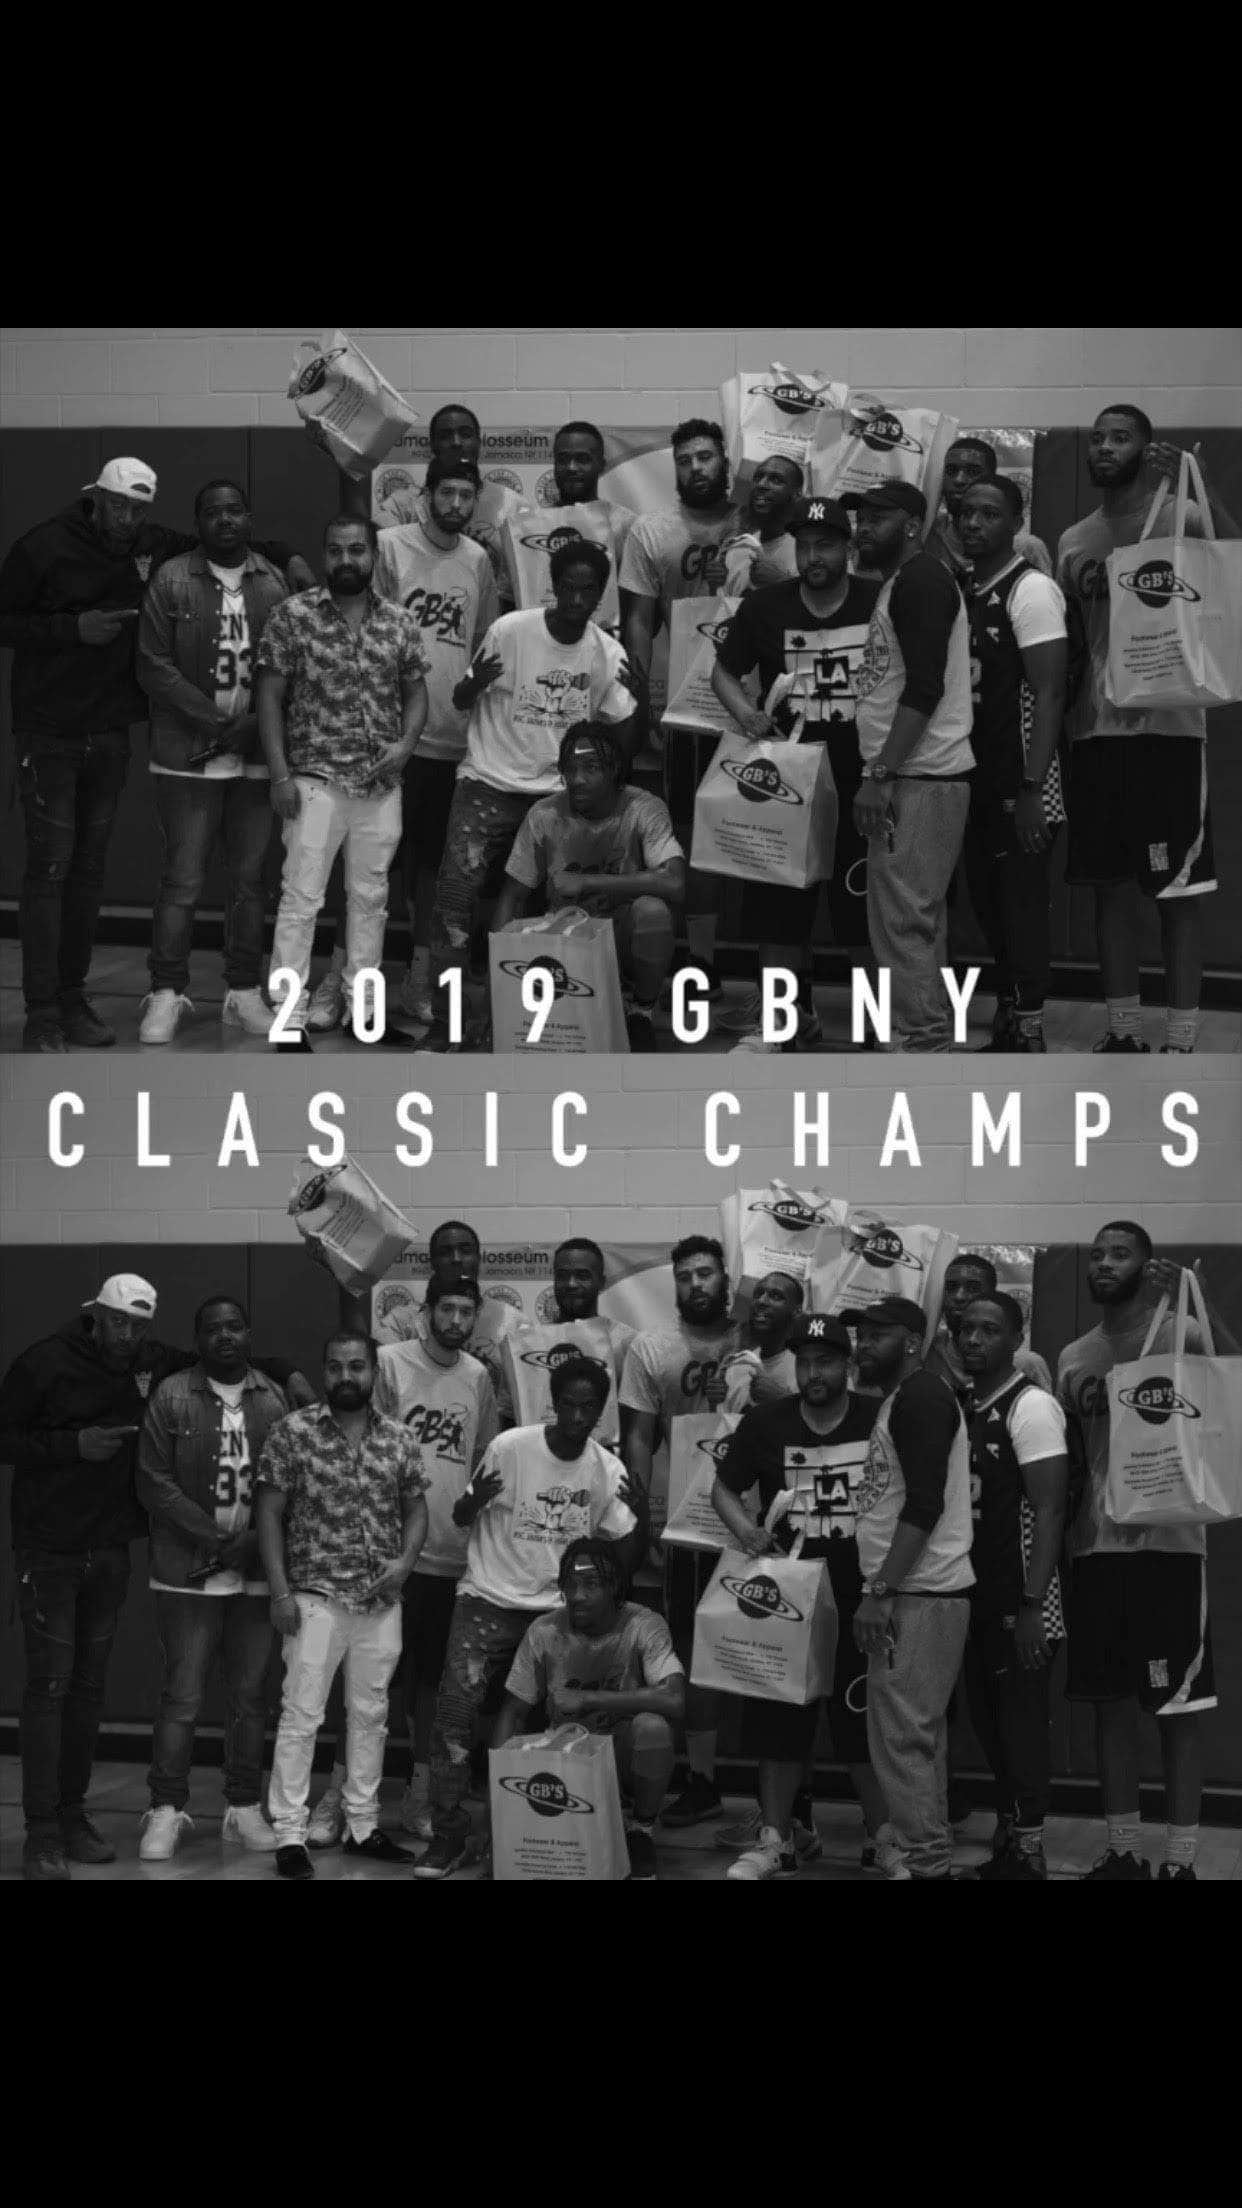 BASKETBALL TOURNAMENT: GB’S Classic powered by Crunch Time Basketball